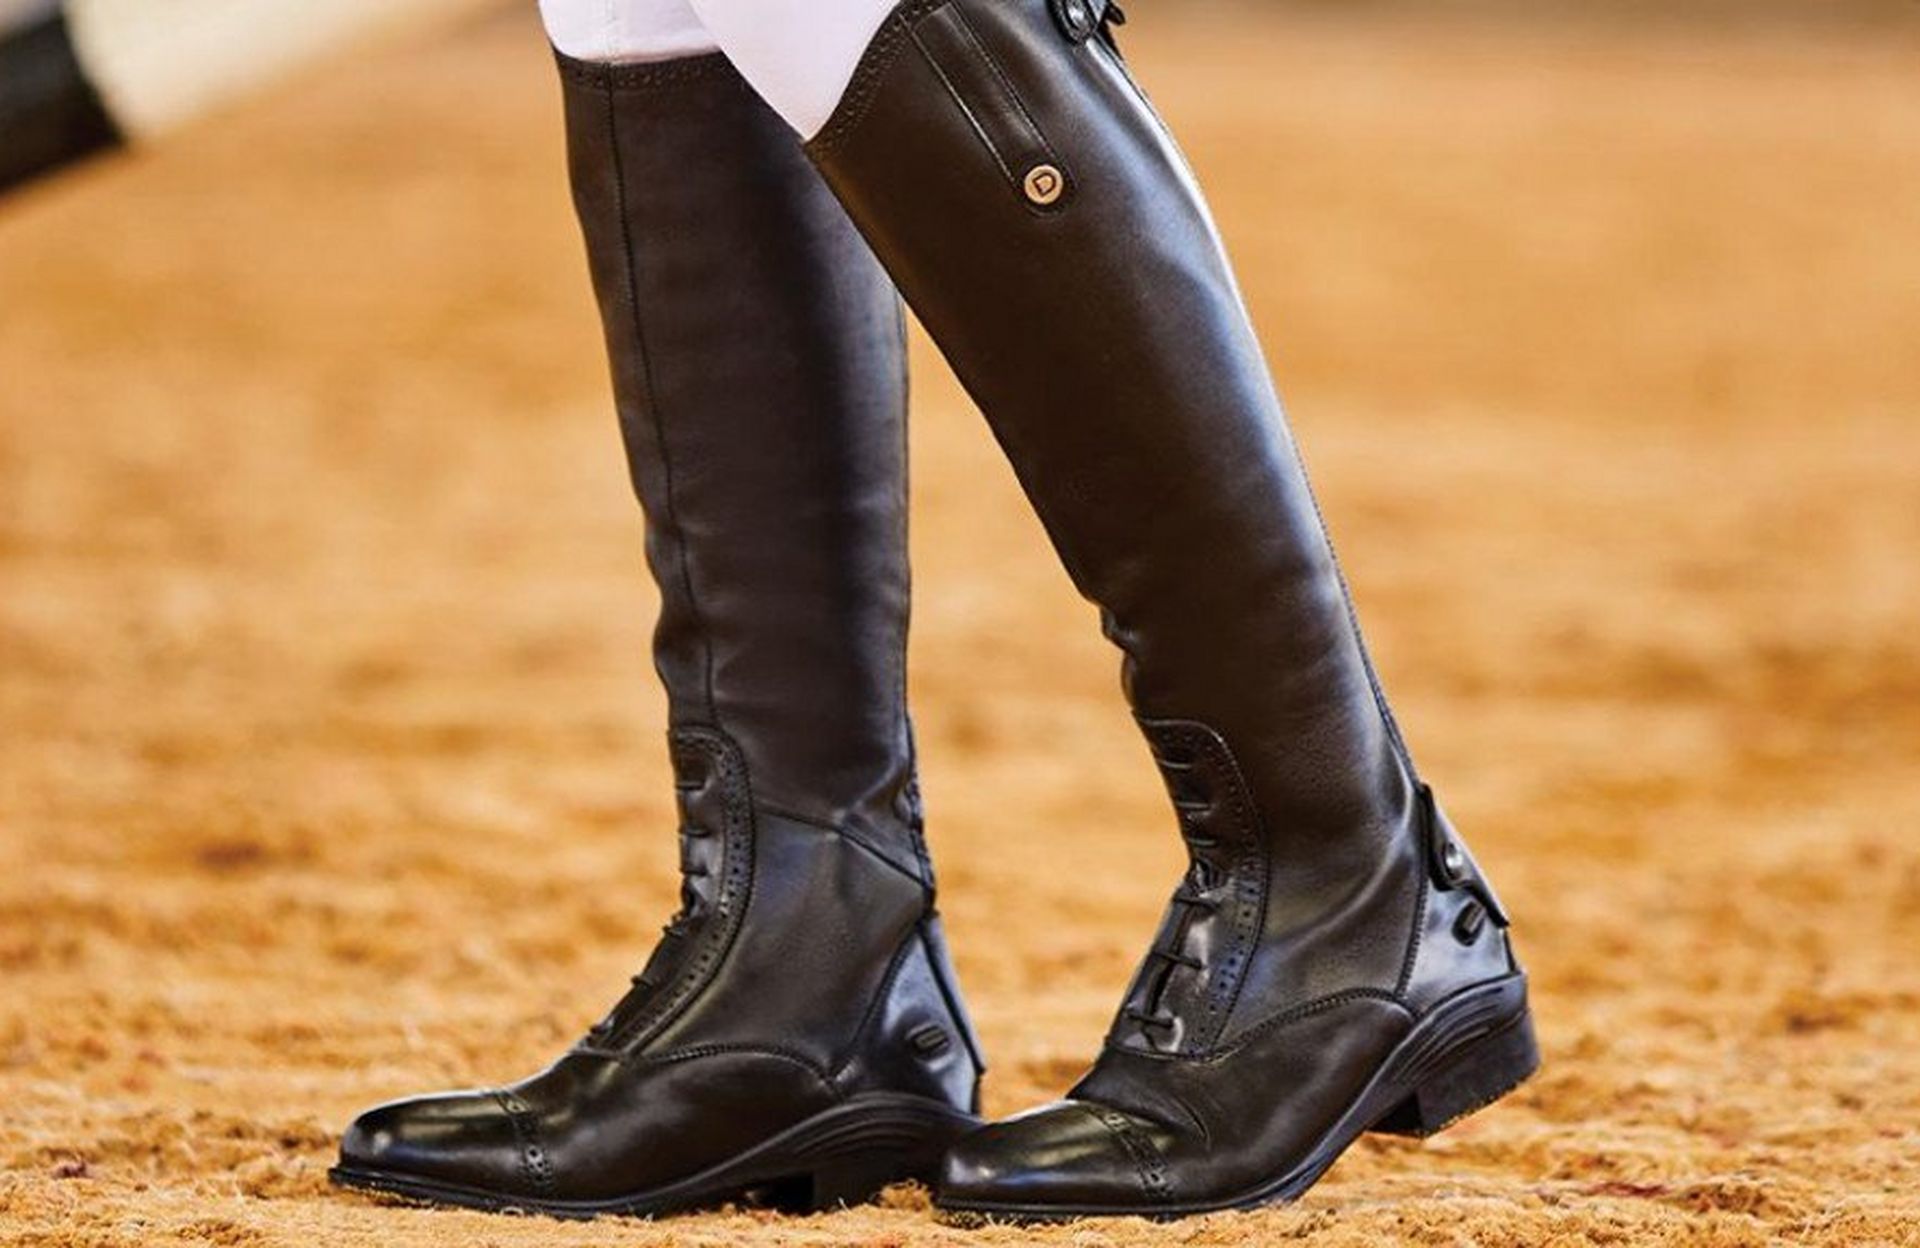 How To Choose Between Short and Long Riding Boots?